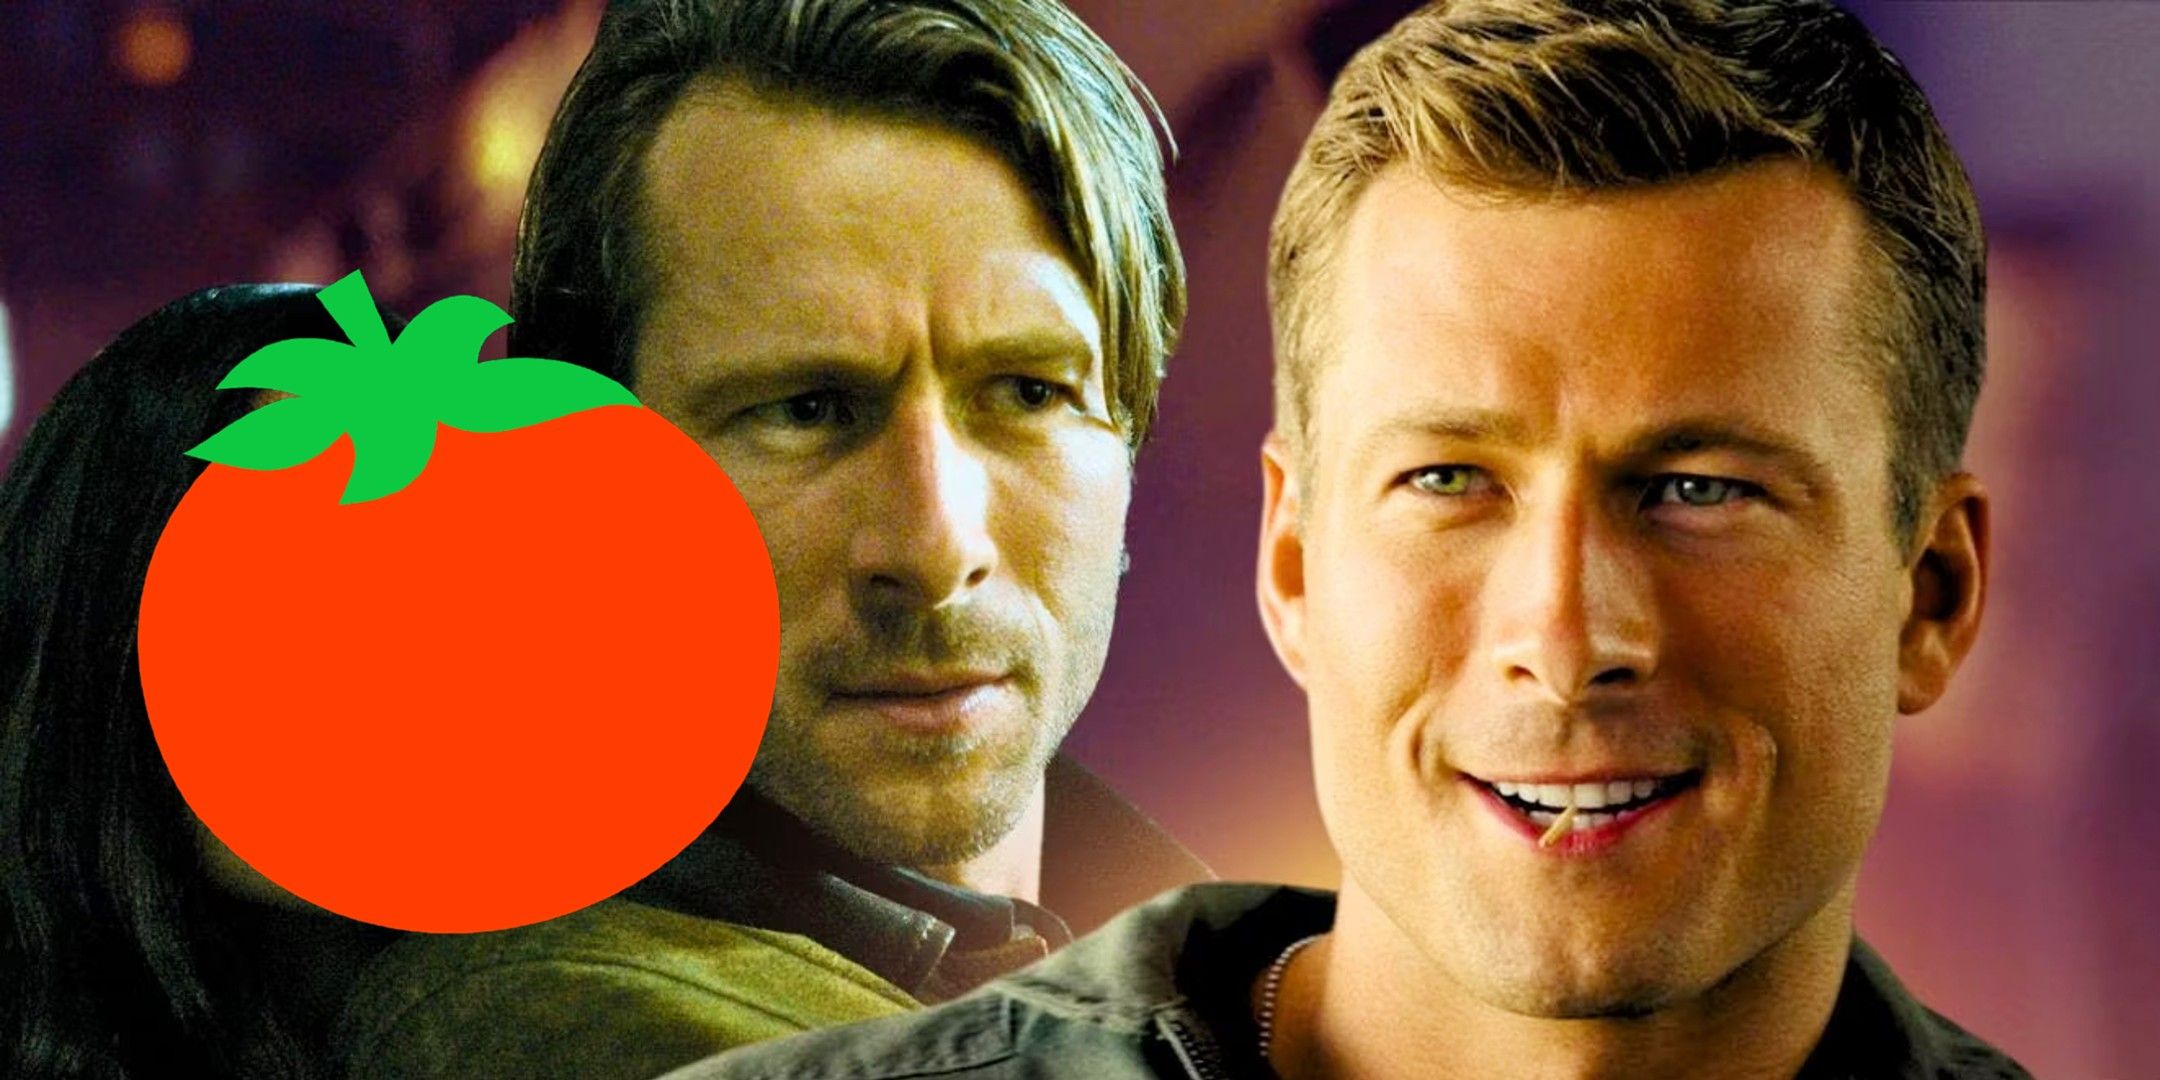 Glen Powell in Hit Man and Top: Maverick next to a fresh ripe tomato